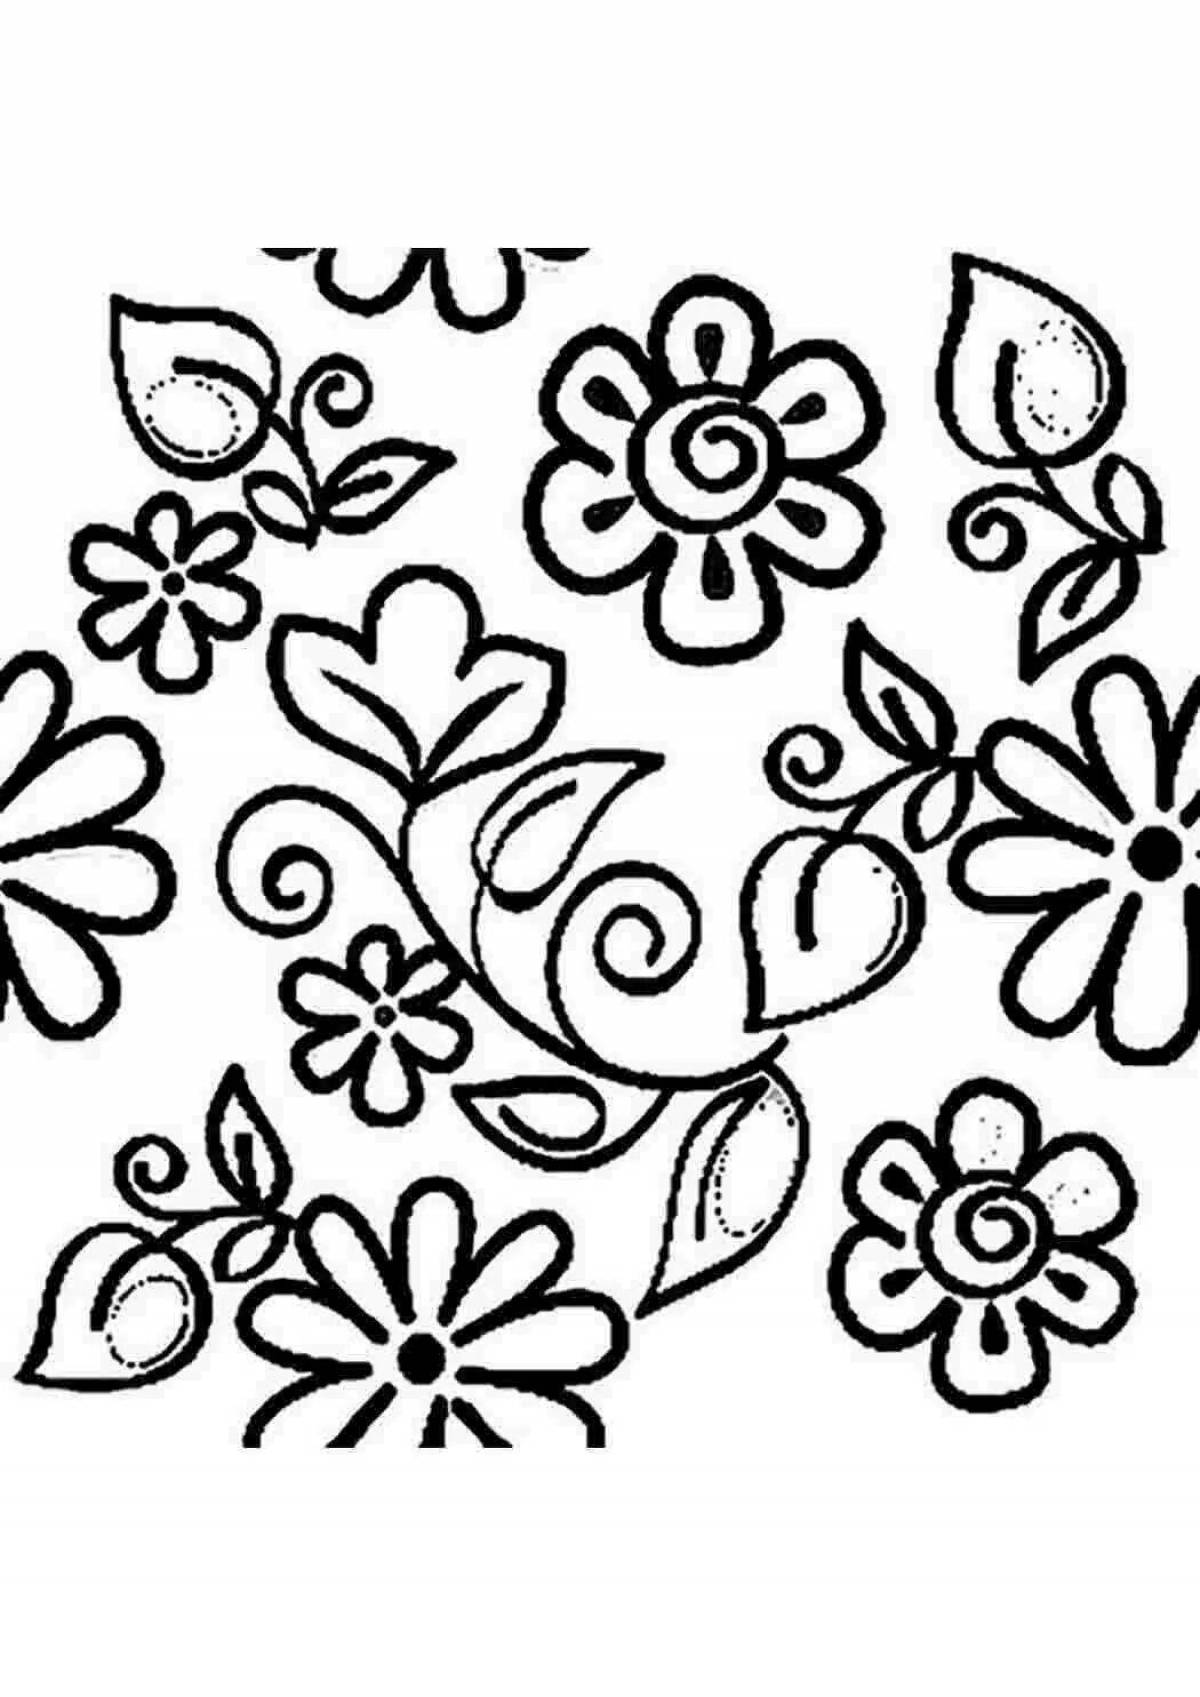 Intricate coloring pages with small patterns